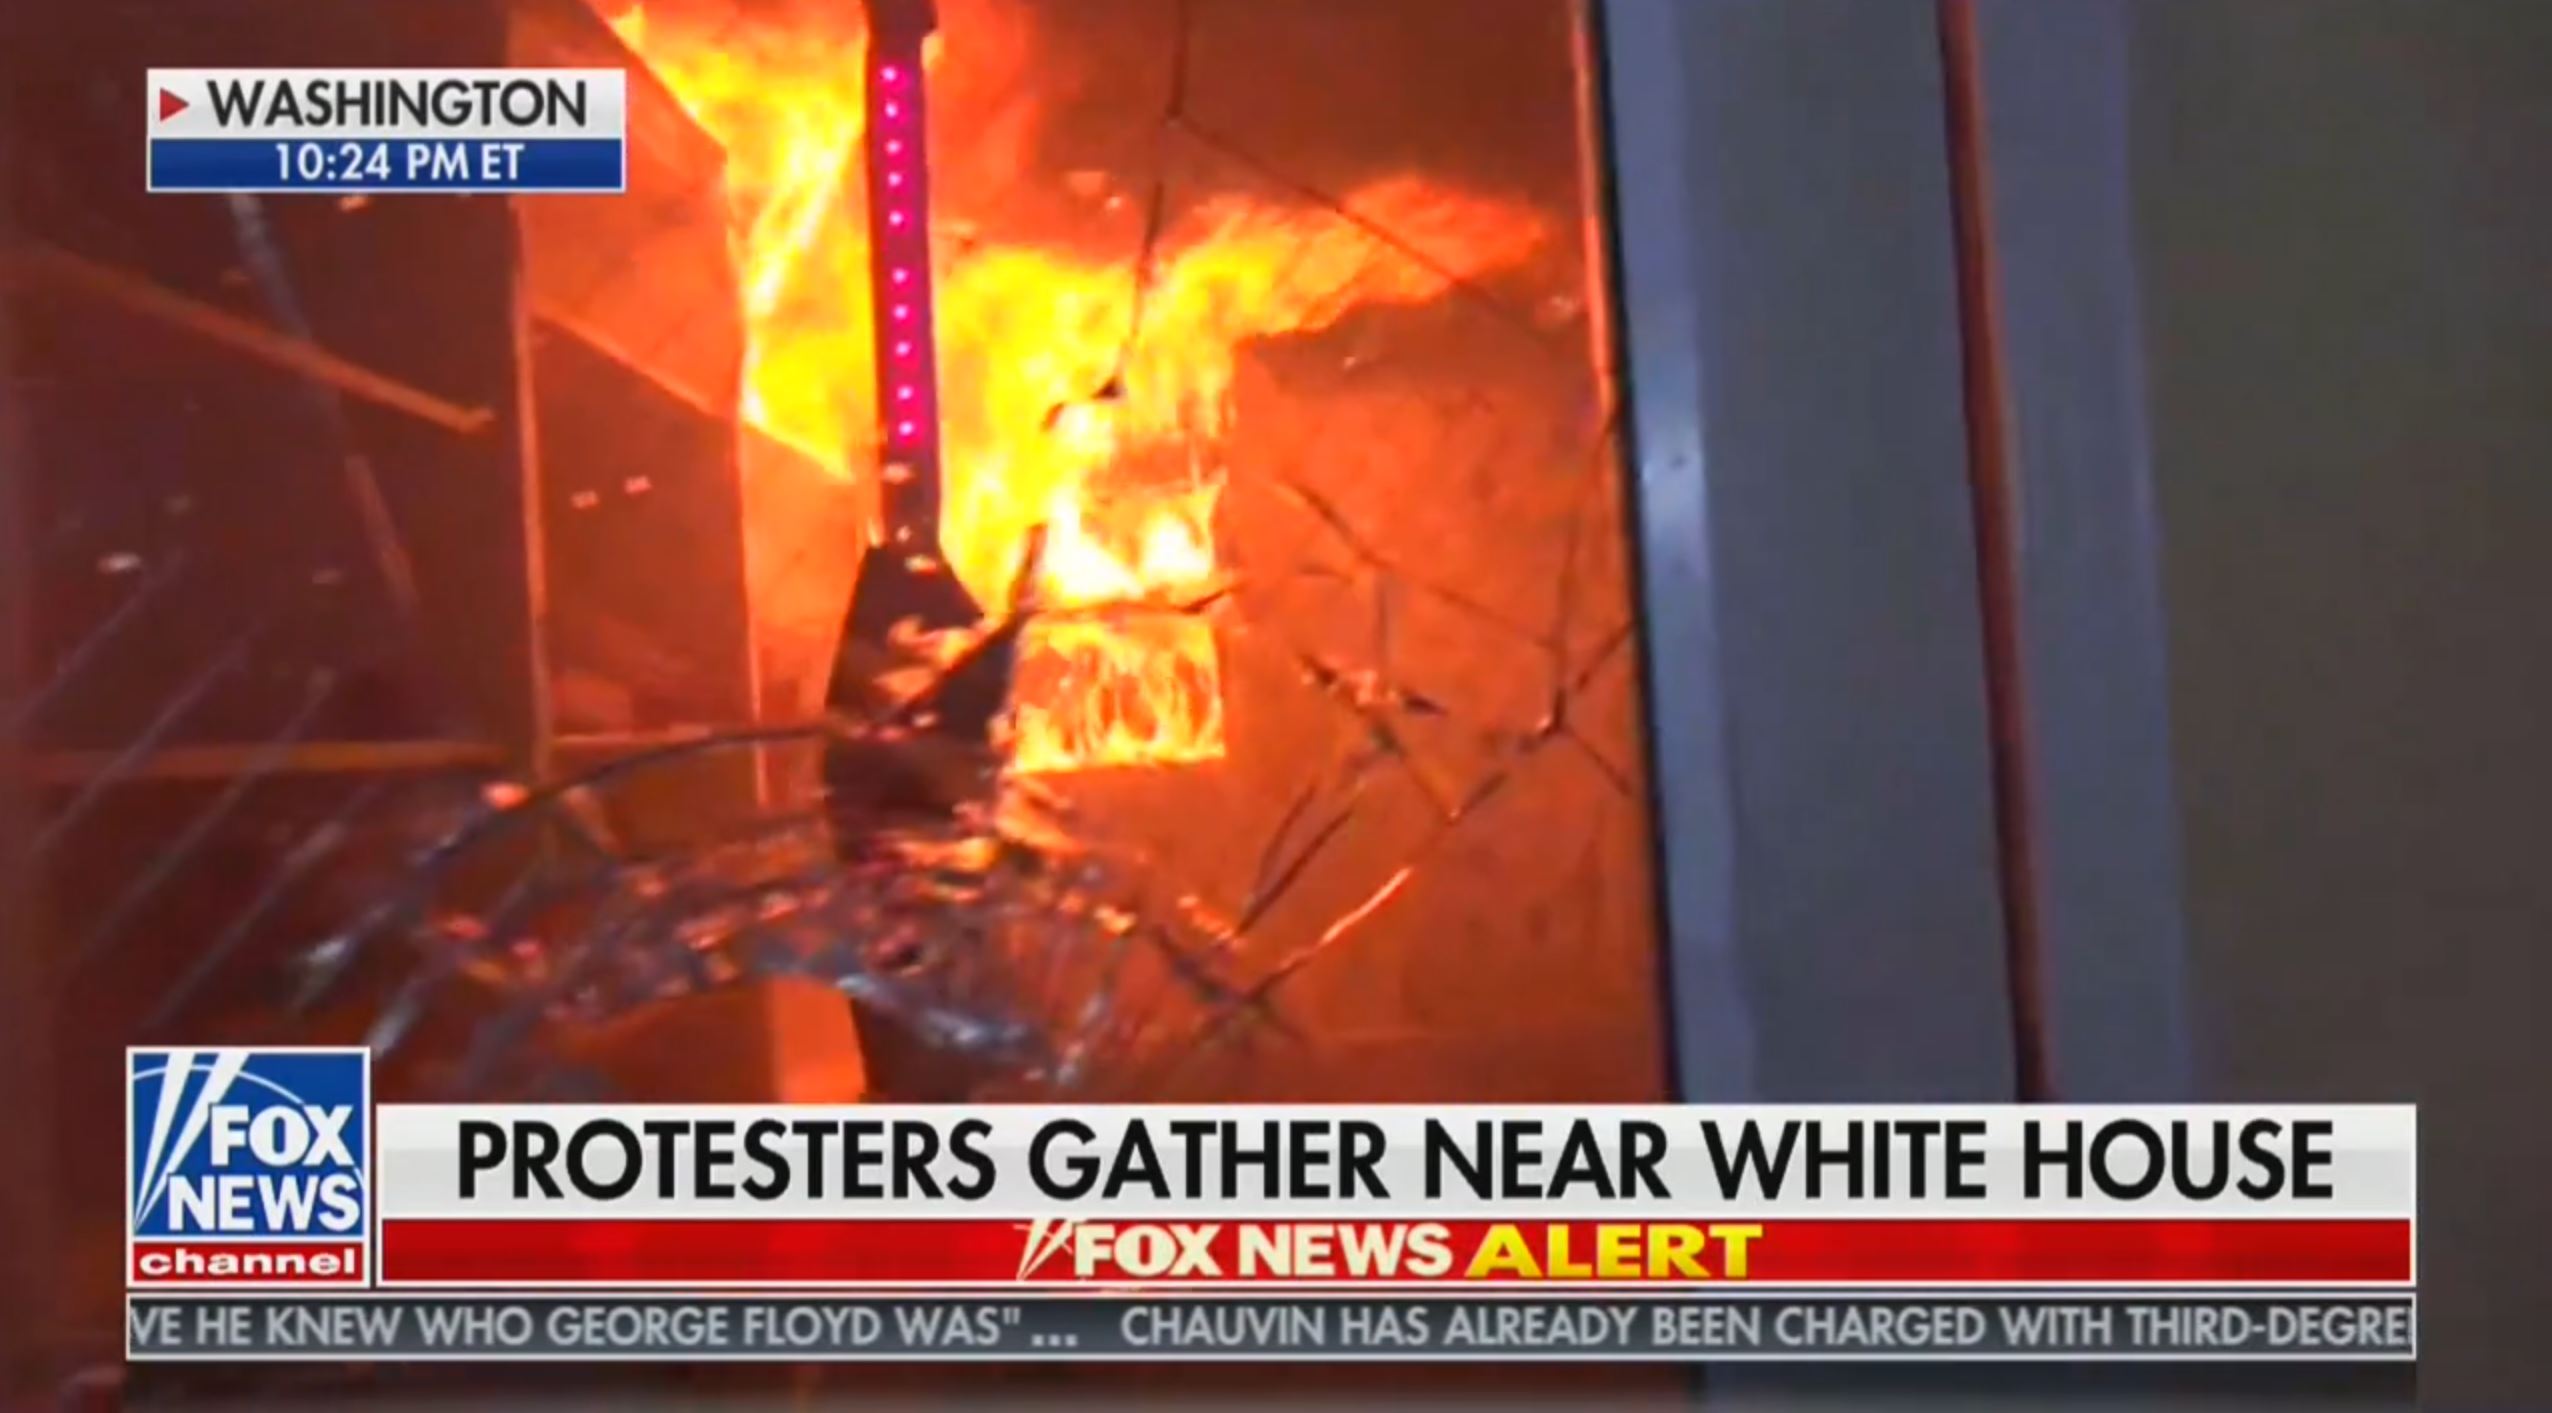 Incendiary Fox News headline, meant to have viewers associate violent acts with peaceful protesters.